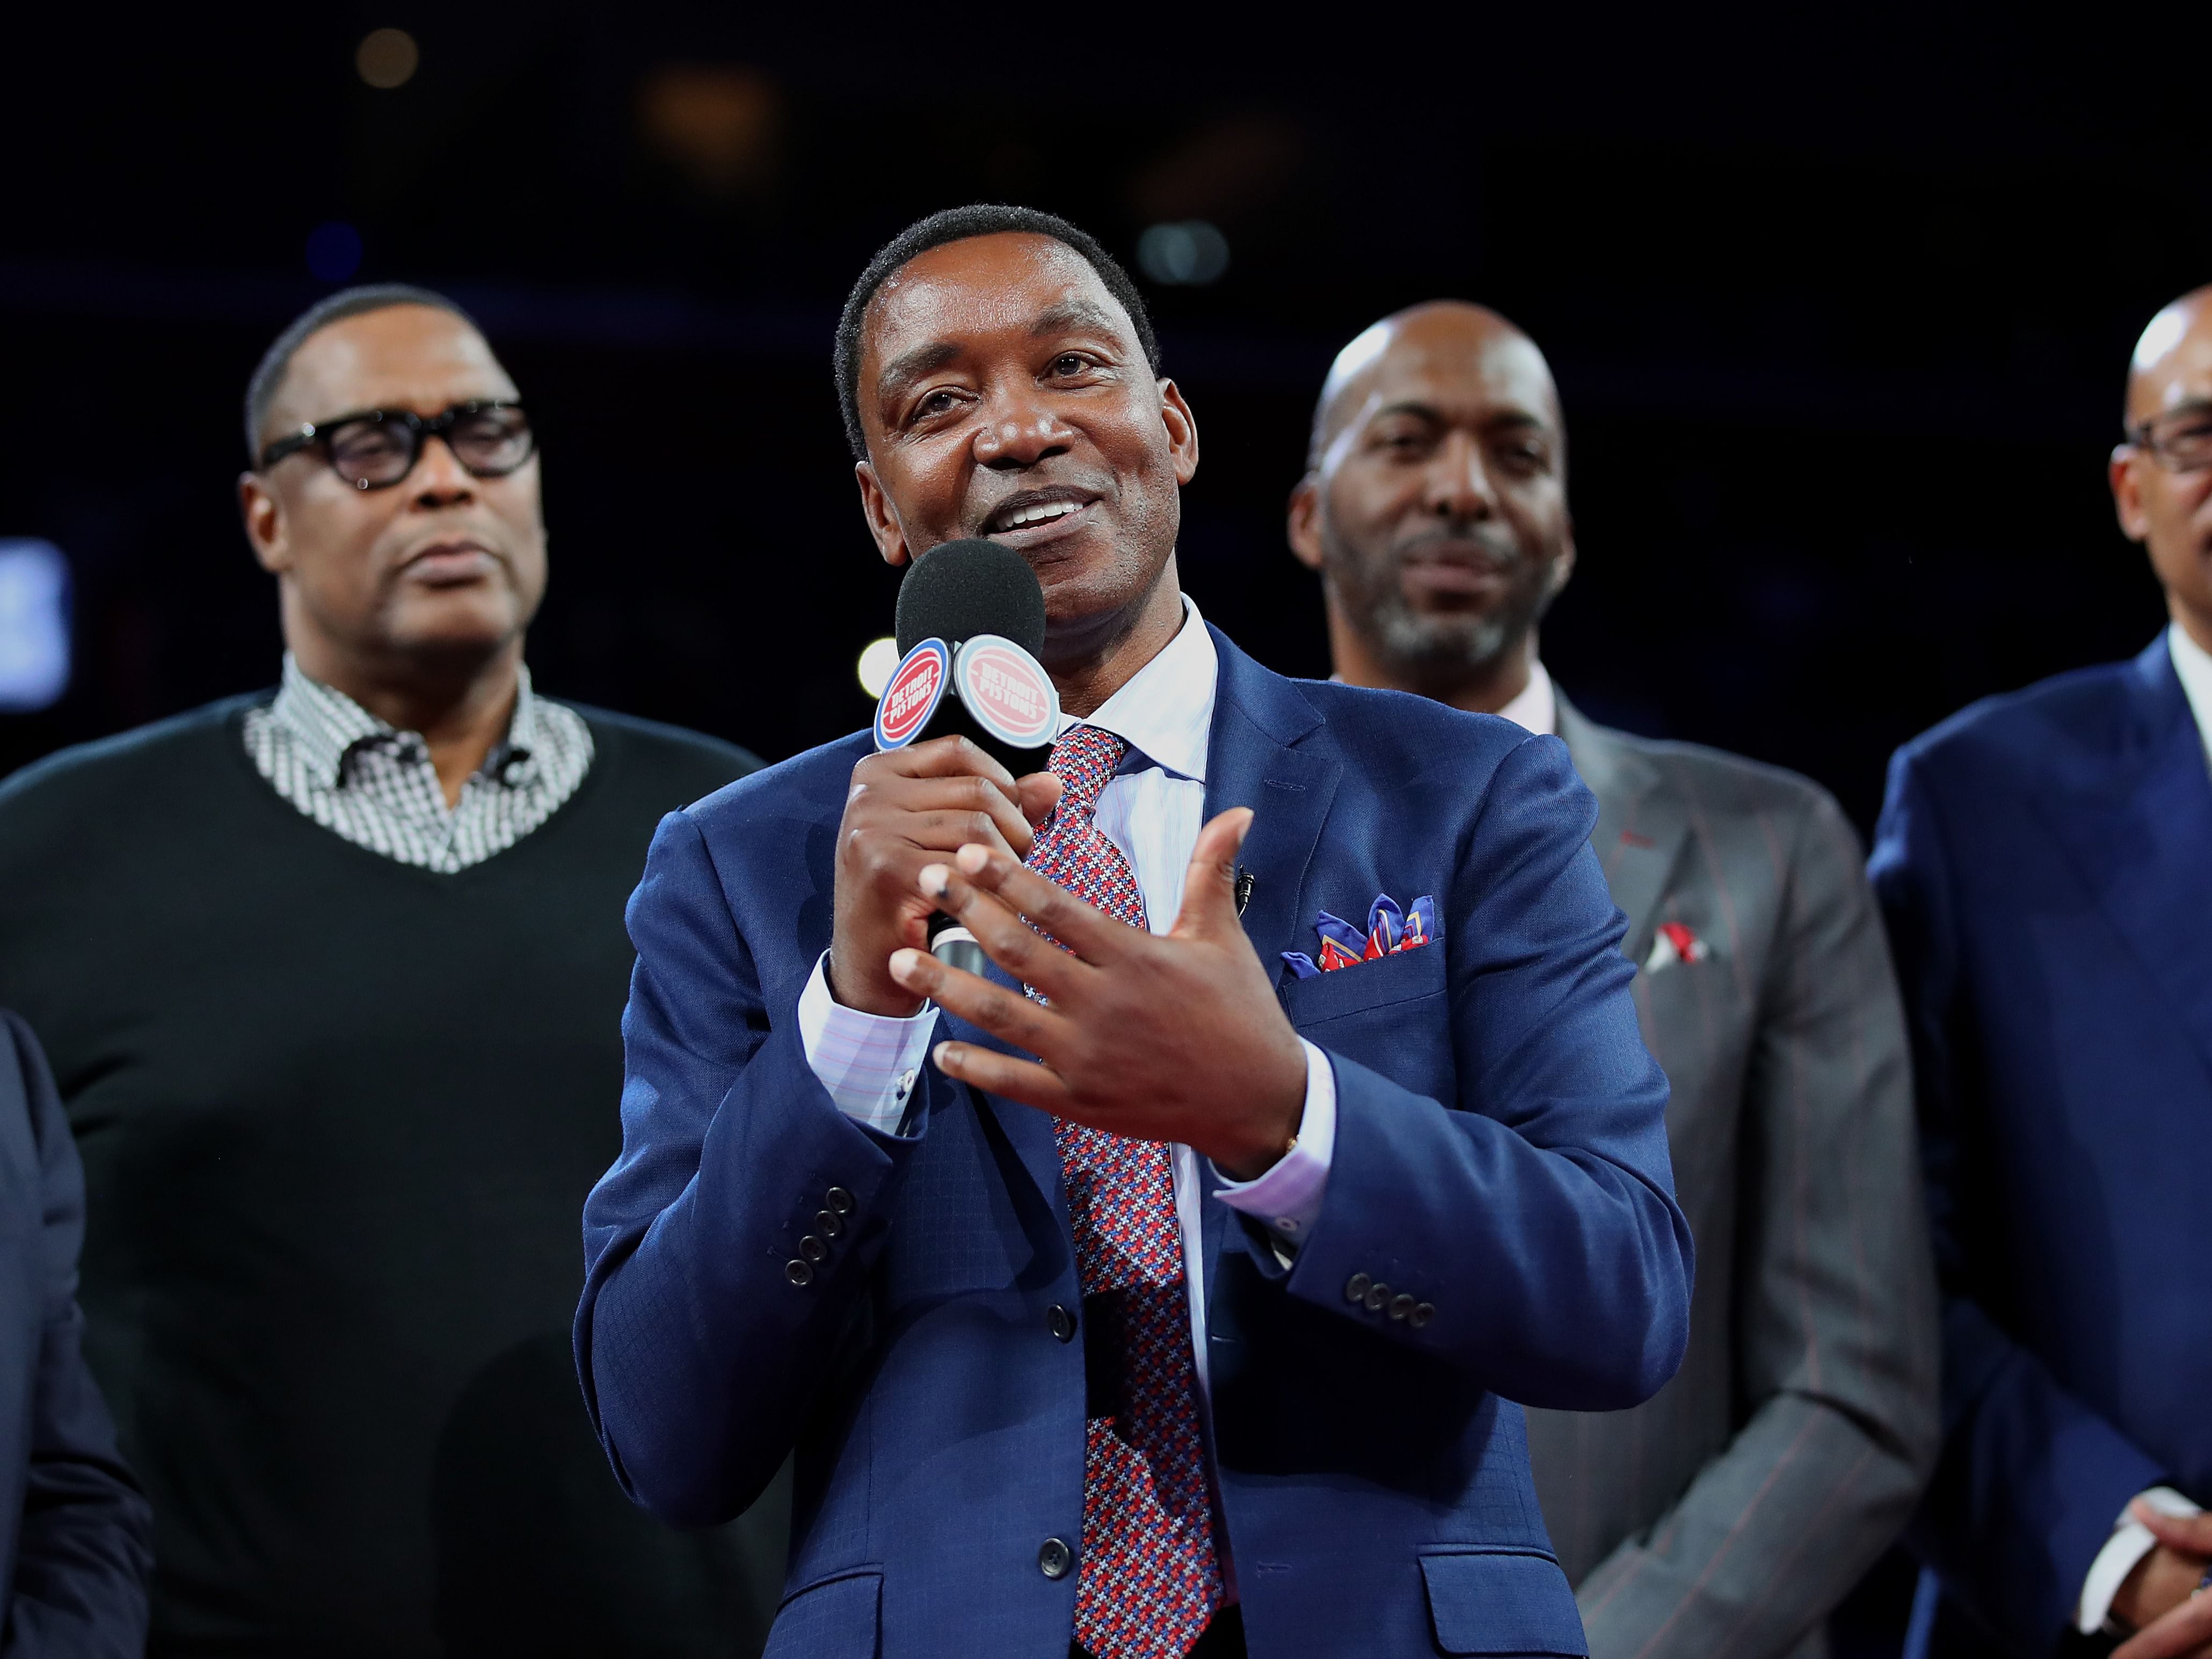 What is Isiah Thomas&rsquo; net worth?